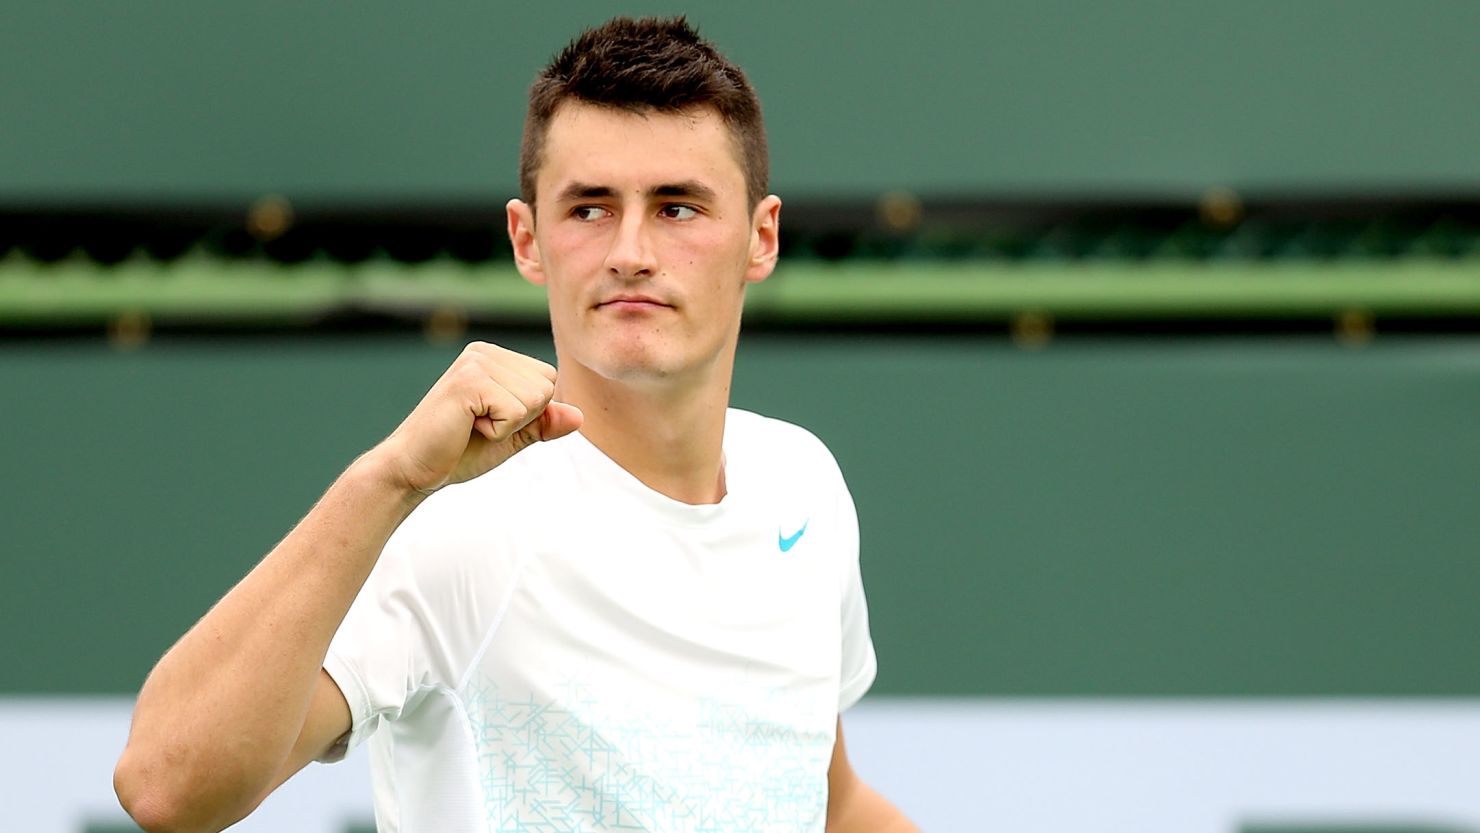 Tomic says his Dad is continuing to coach him and travel with him to tournaments despite assault charges.